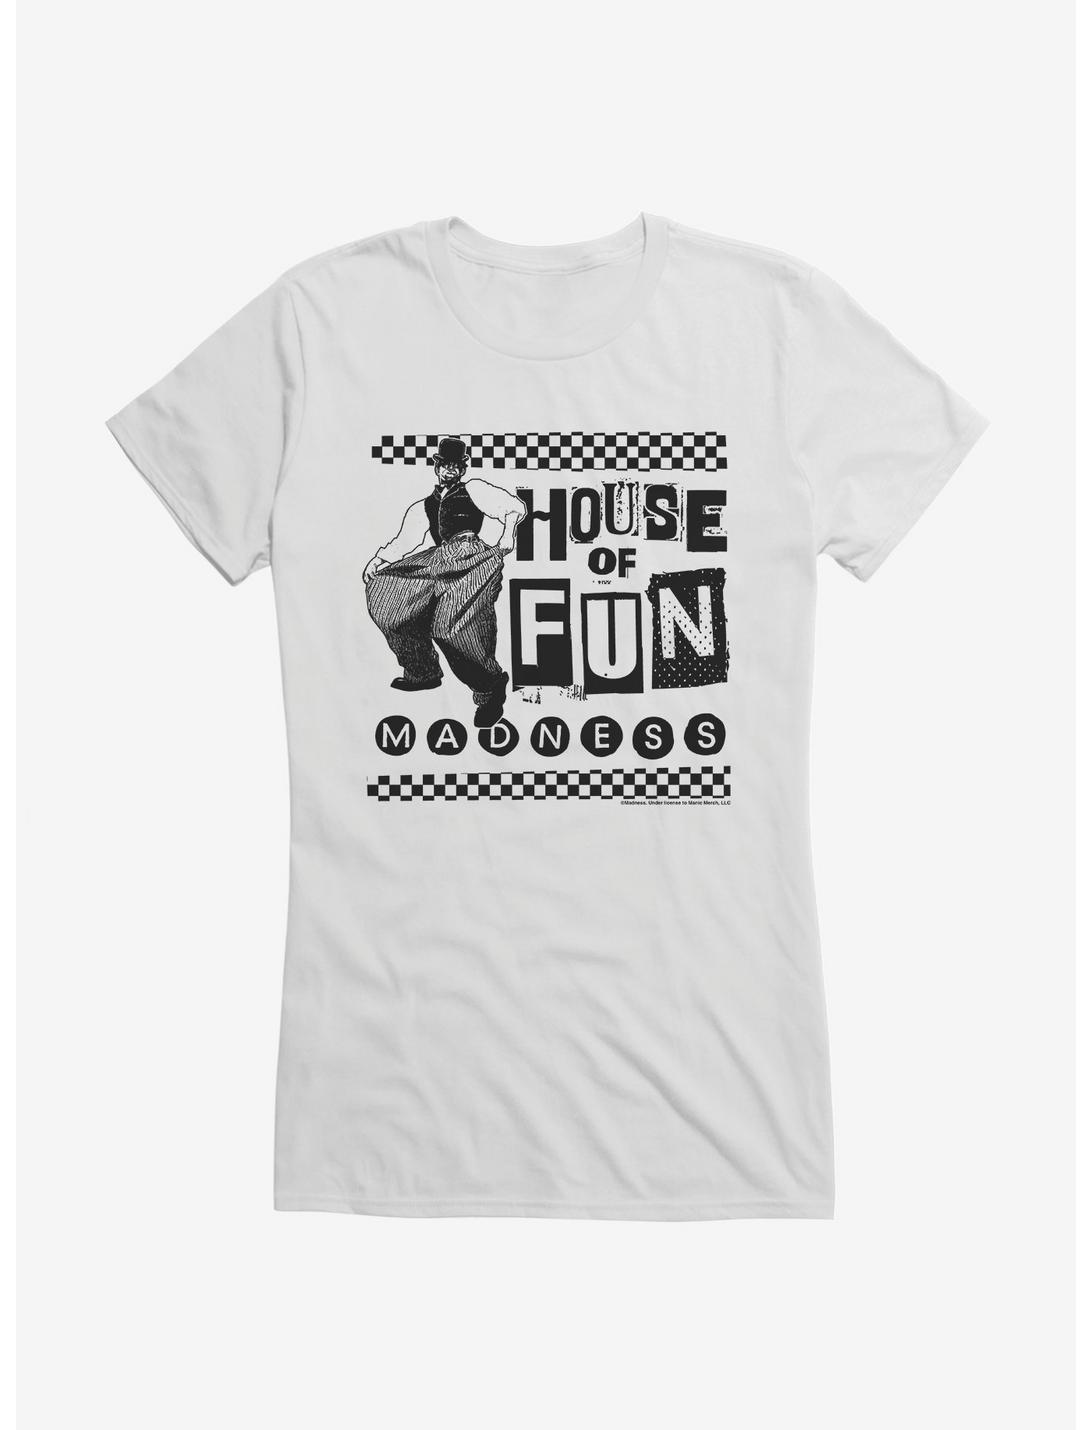 Madness House Of Fun Girls T-Shirt, WHITE, hi-res